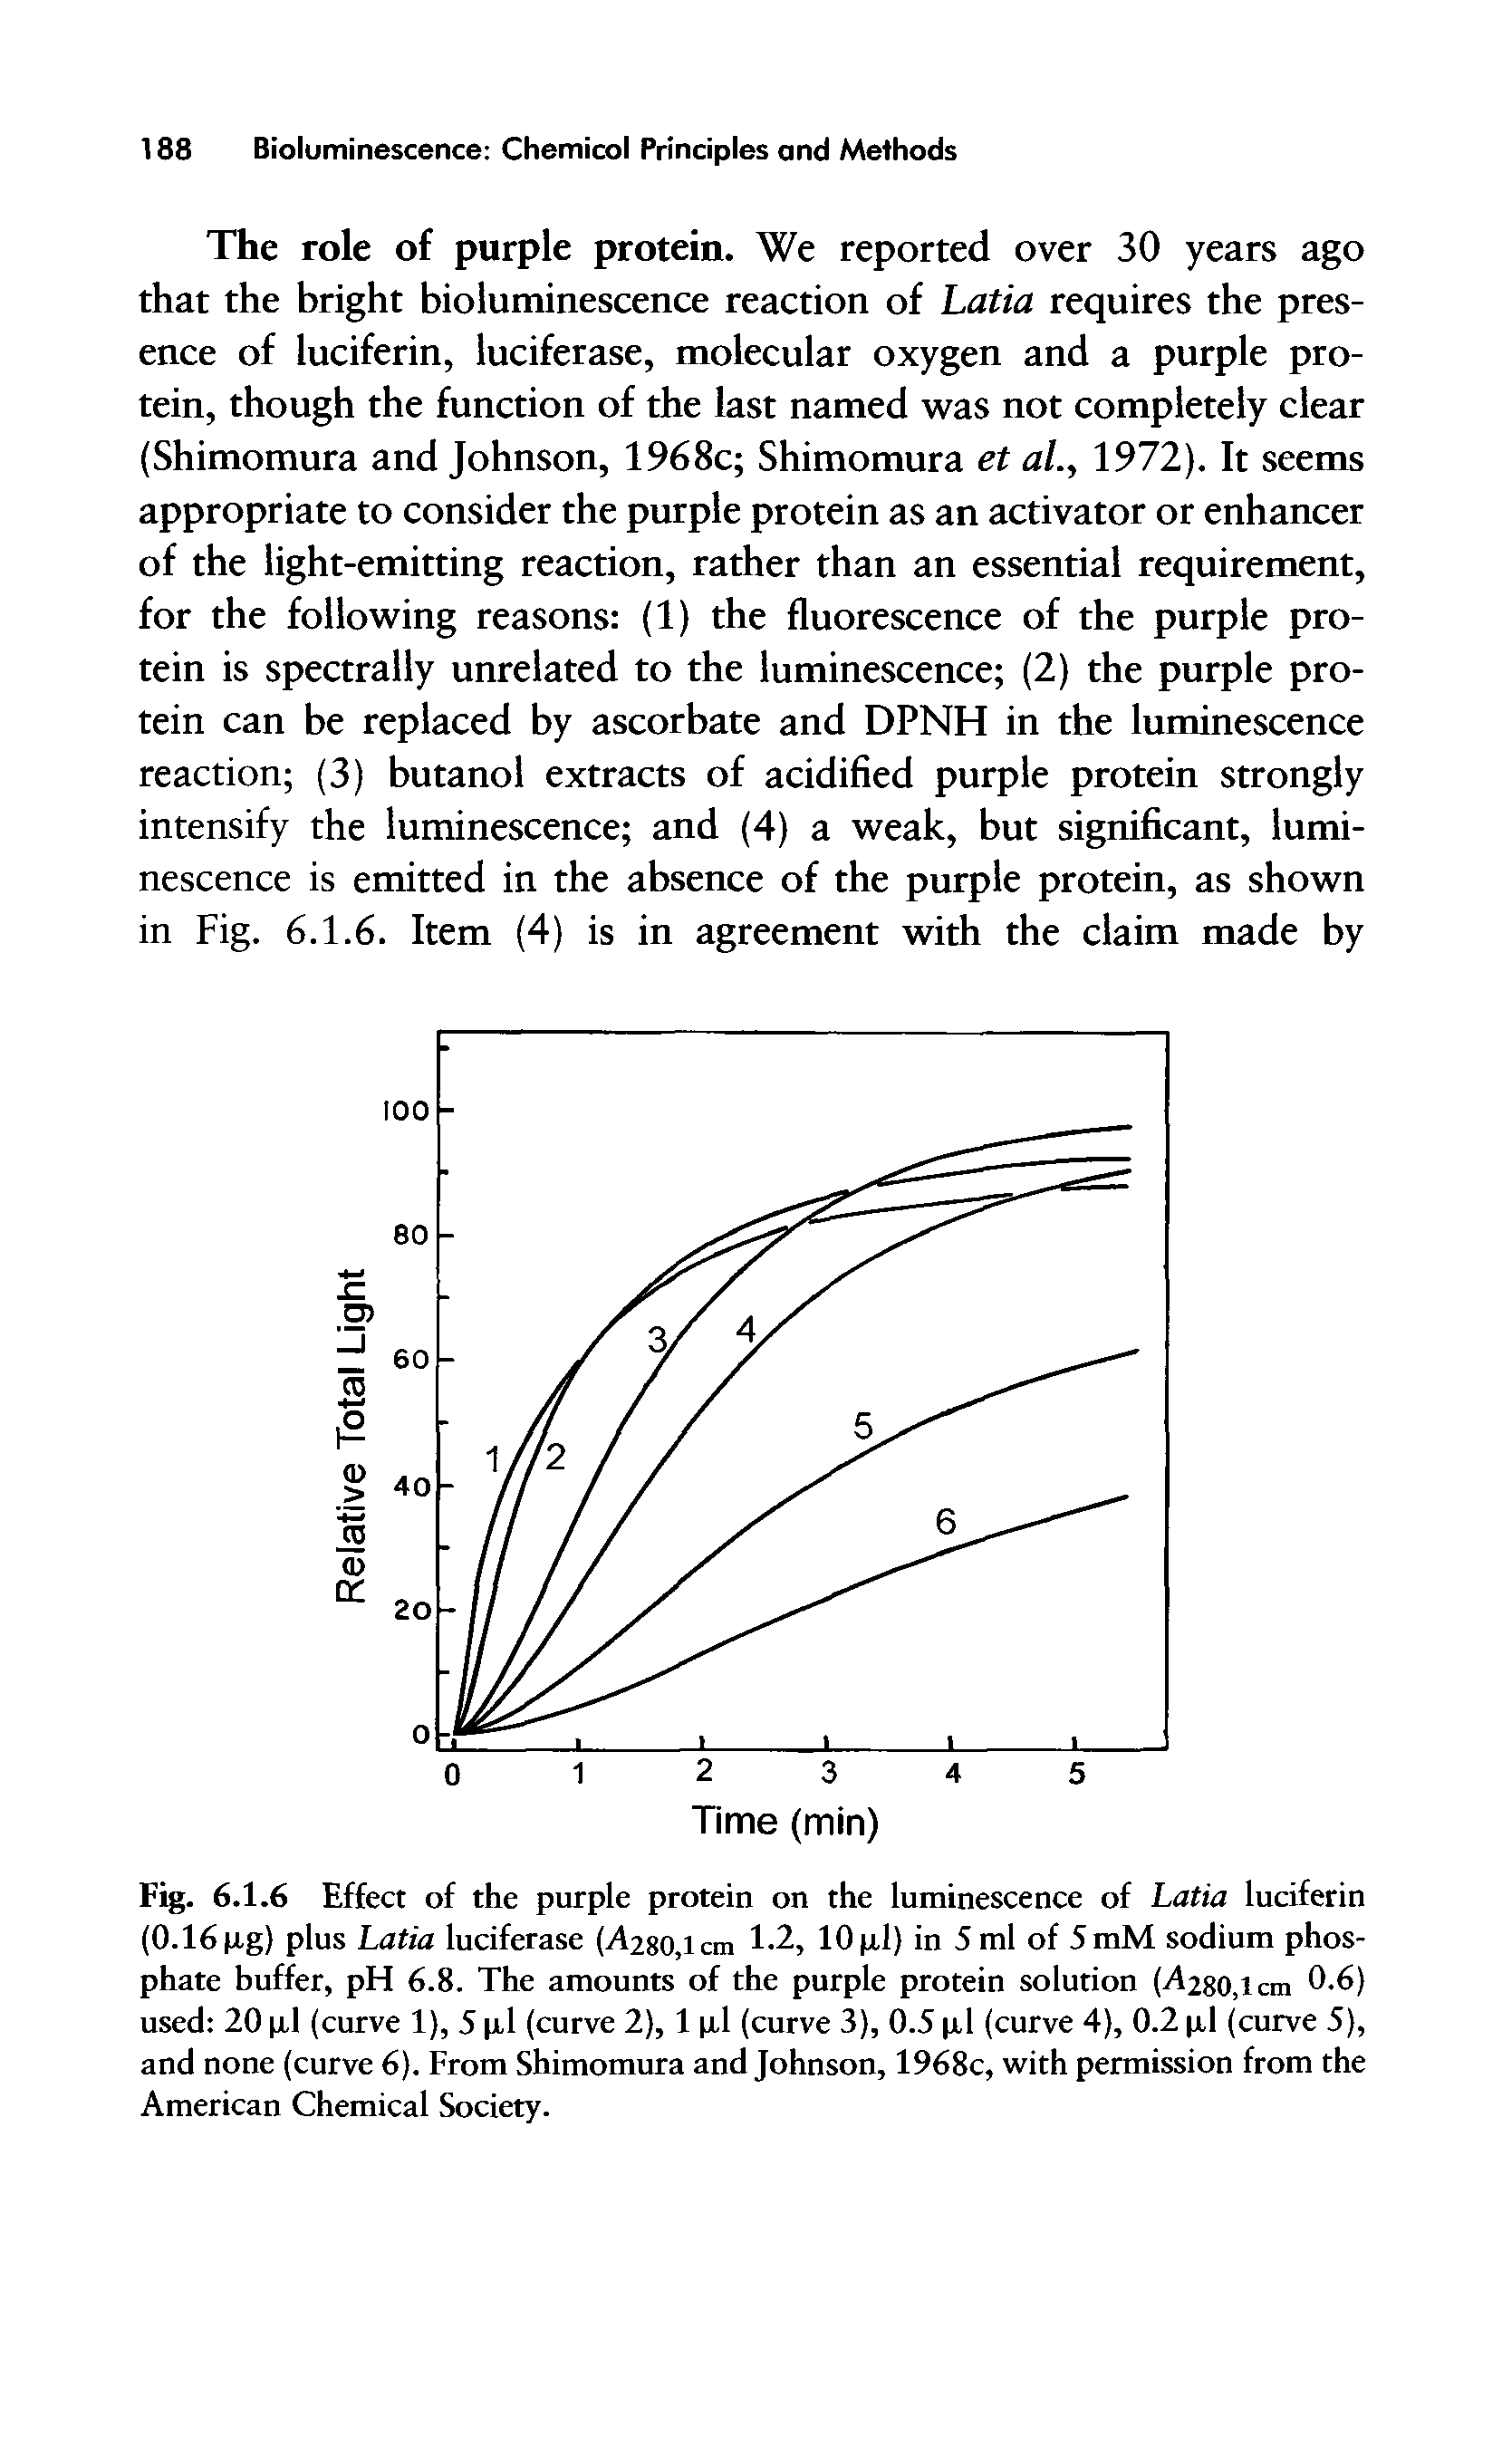 Fig. 6.1.6 Effect of the purple protein on the luminescence of Latia luciferin (0.16 jxg) plus Latia luciferase (A280,icm 1.2, 10 pi) in 5 ml of 5mM sodium phosphate buffer, pH 6.8. The amounts of the purple protein solution ( 280,1 cm 0.6) used 20 pi (curve 1), 5 pi (curve 2), 1 pi (curve 3), 0.5 pi (curve 4), 0.2 pi (curve 5), and none (curve 6). From Shimomura and Johnson, 1968c, with permission from the American Chemical Society.